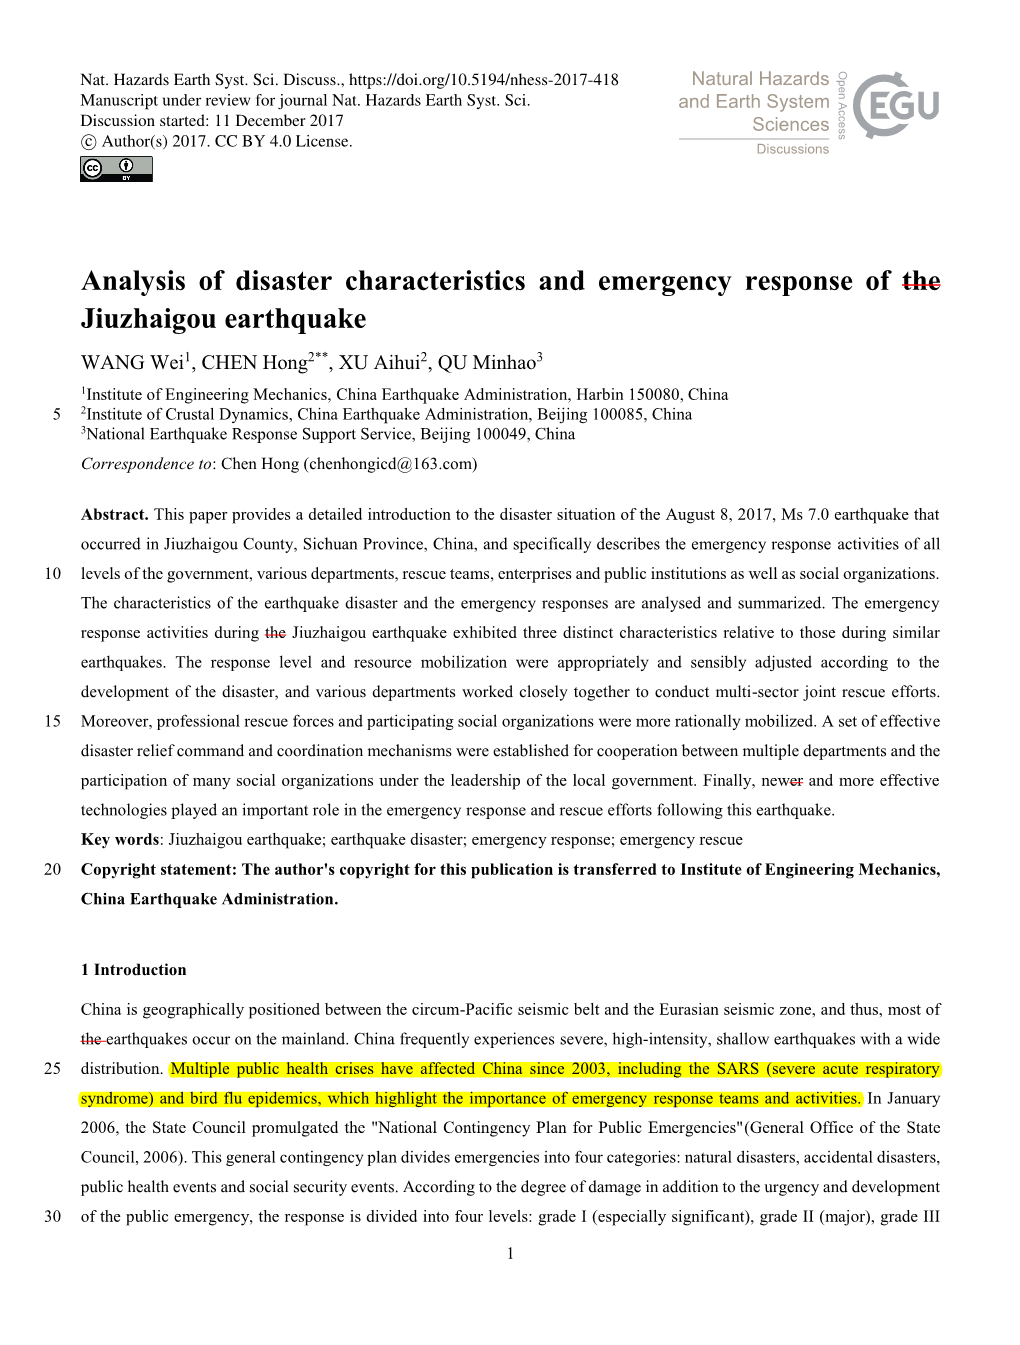 Analysis of Disaster Characteristics and Emergency Response of The